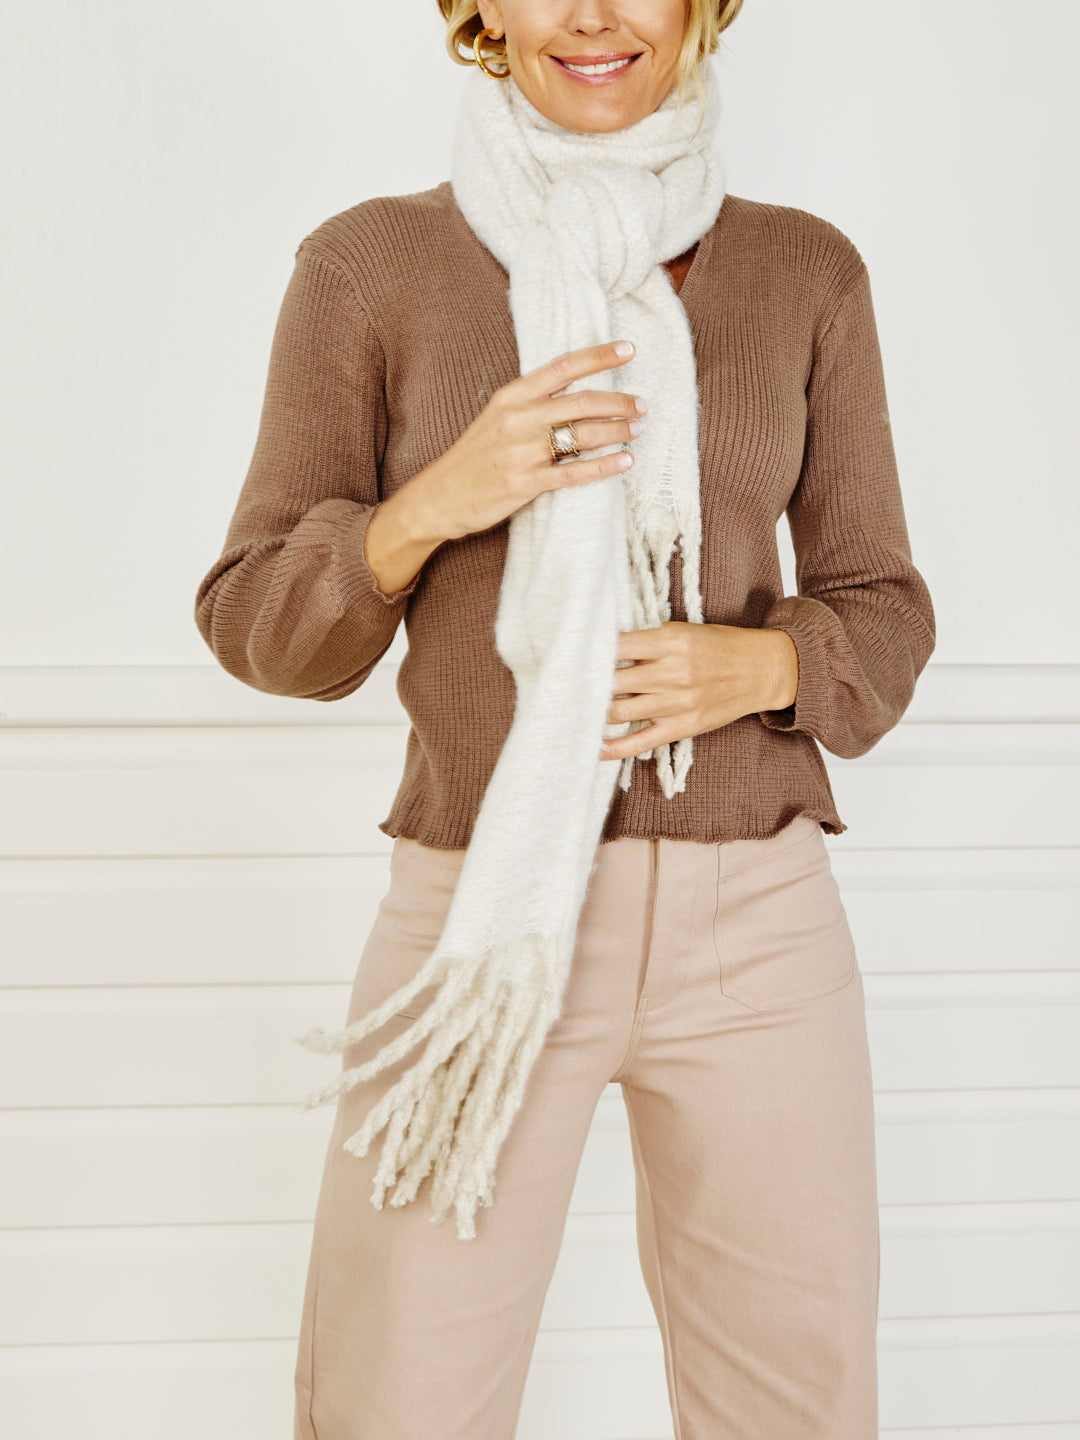 Blanket Check Scarf - Boucle Cream